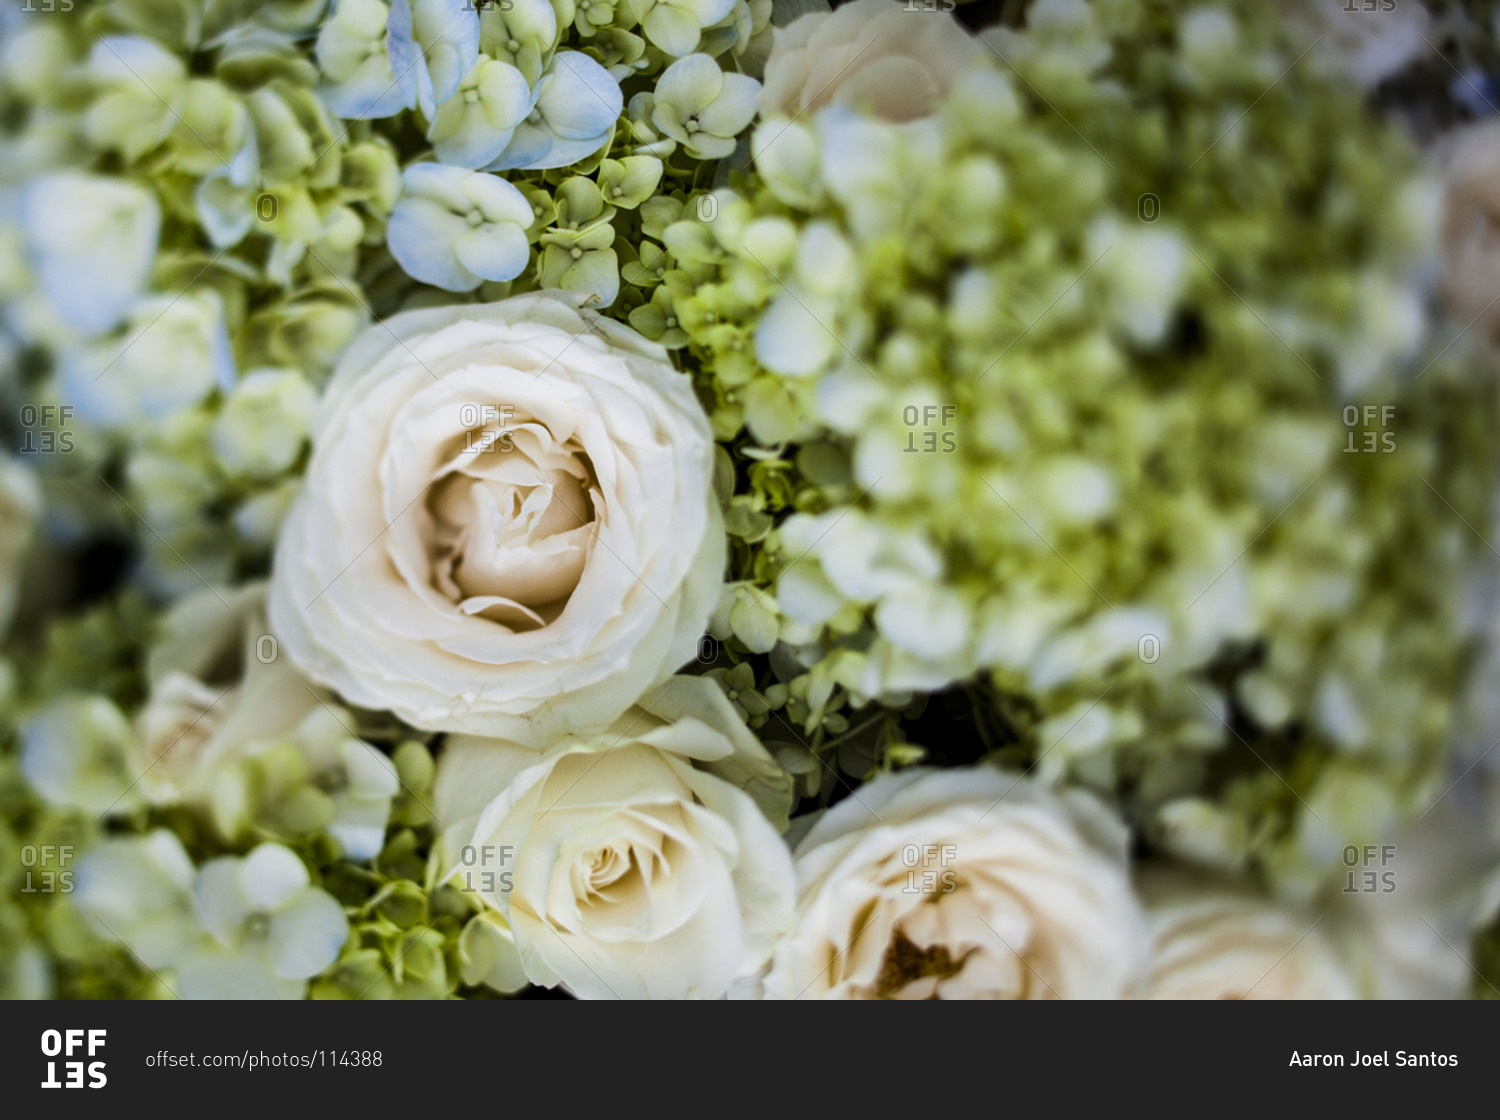 Close up of white roses in a wedding bouquet